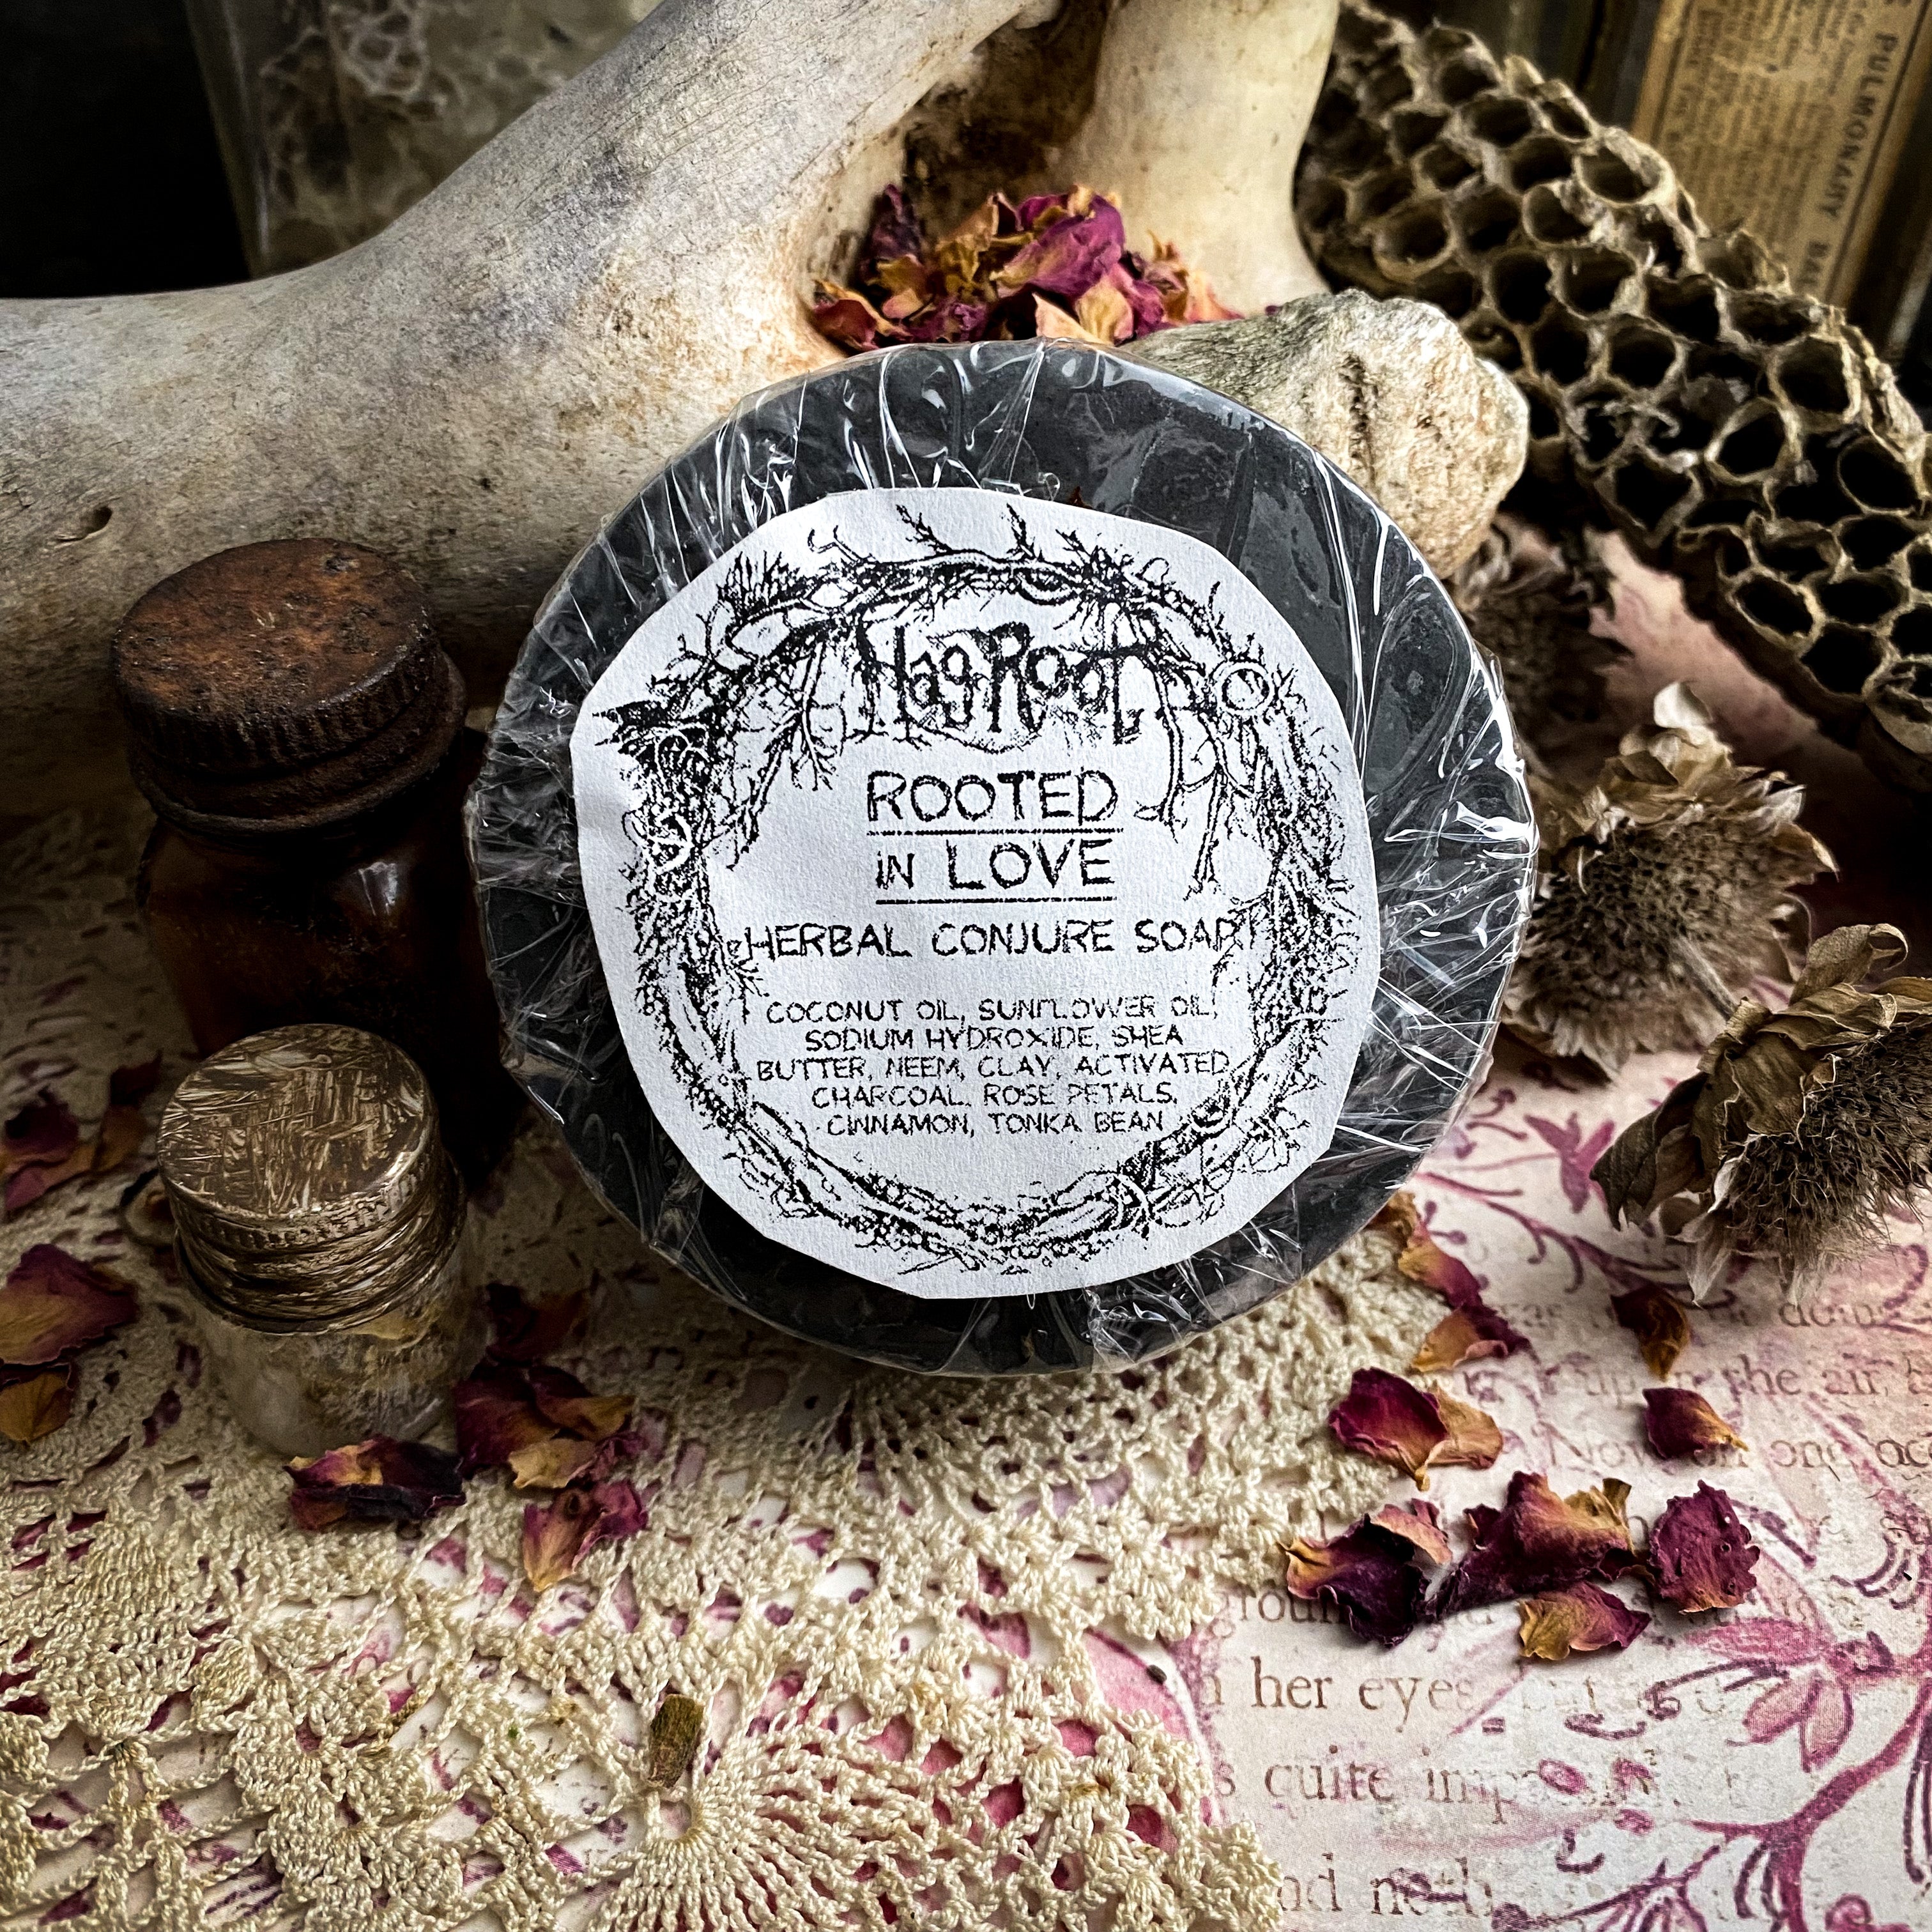 Rooted in Love - Herbal Conjure Soap